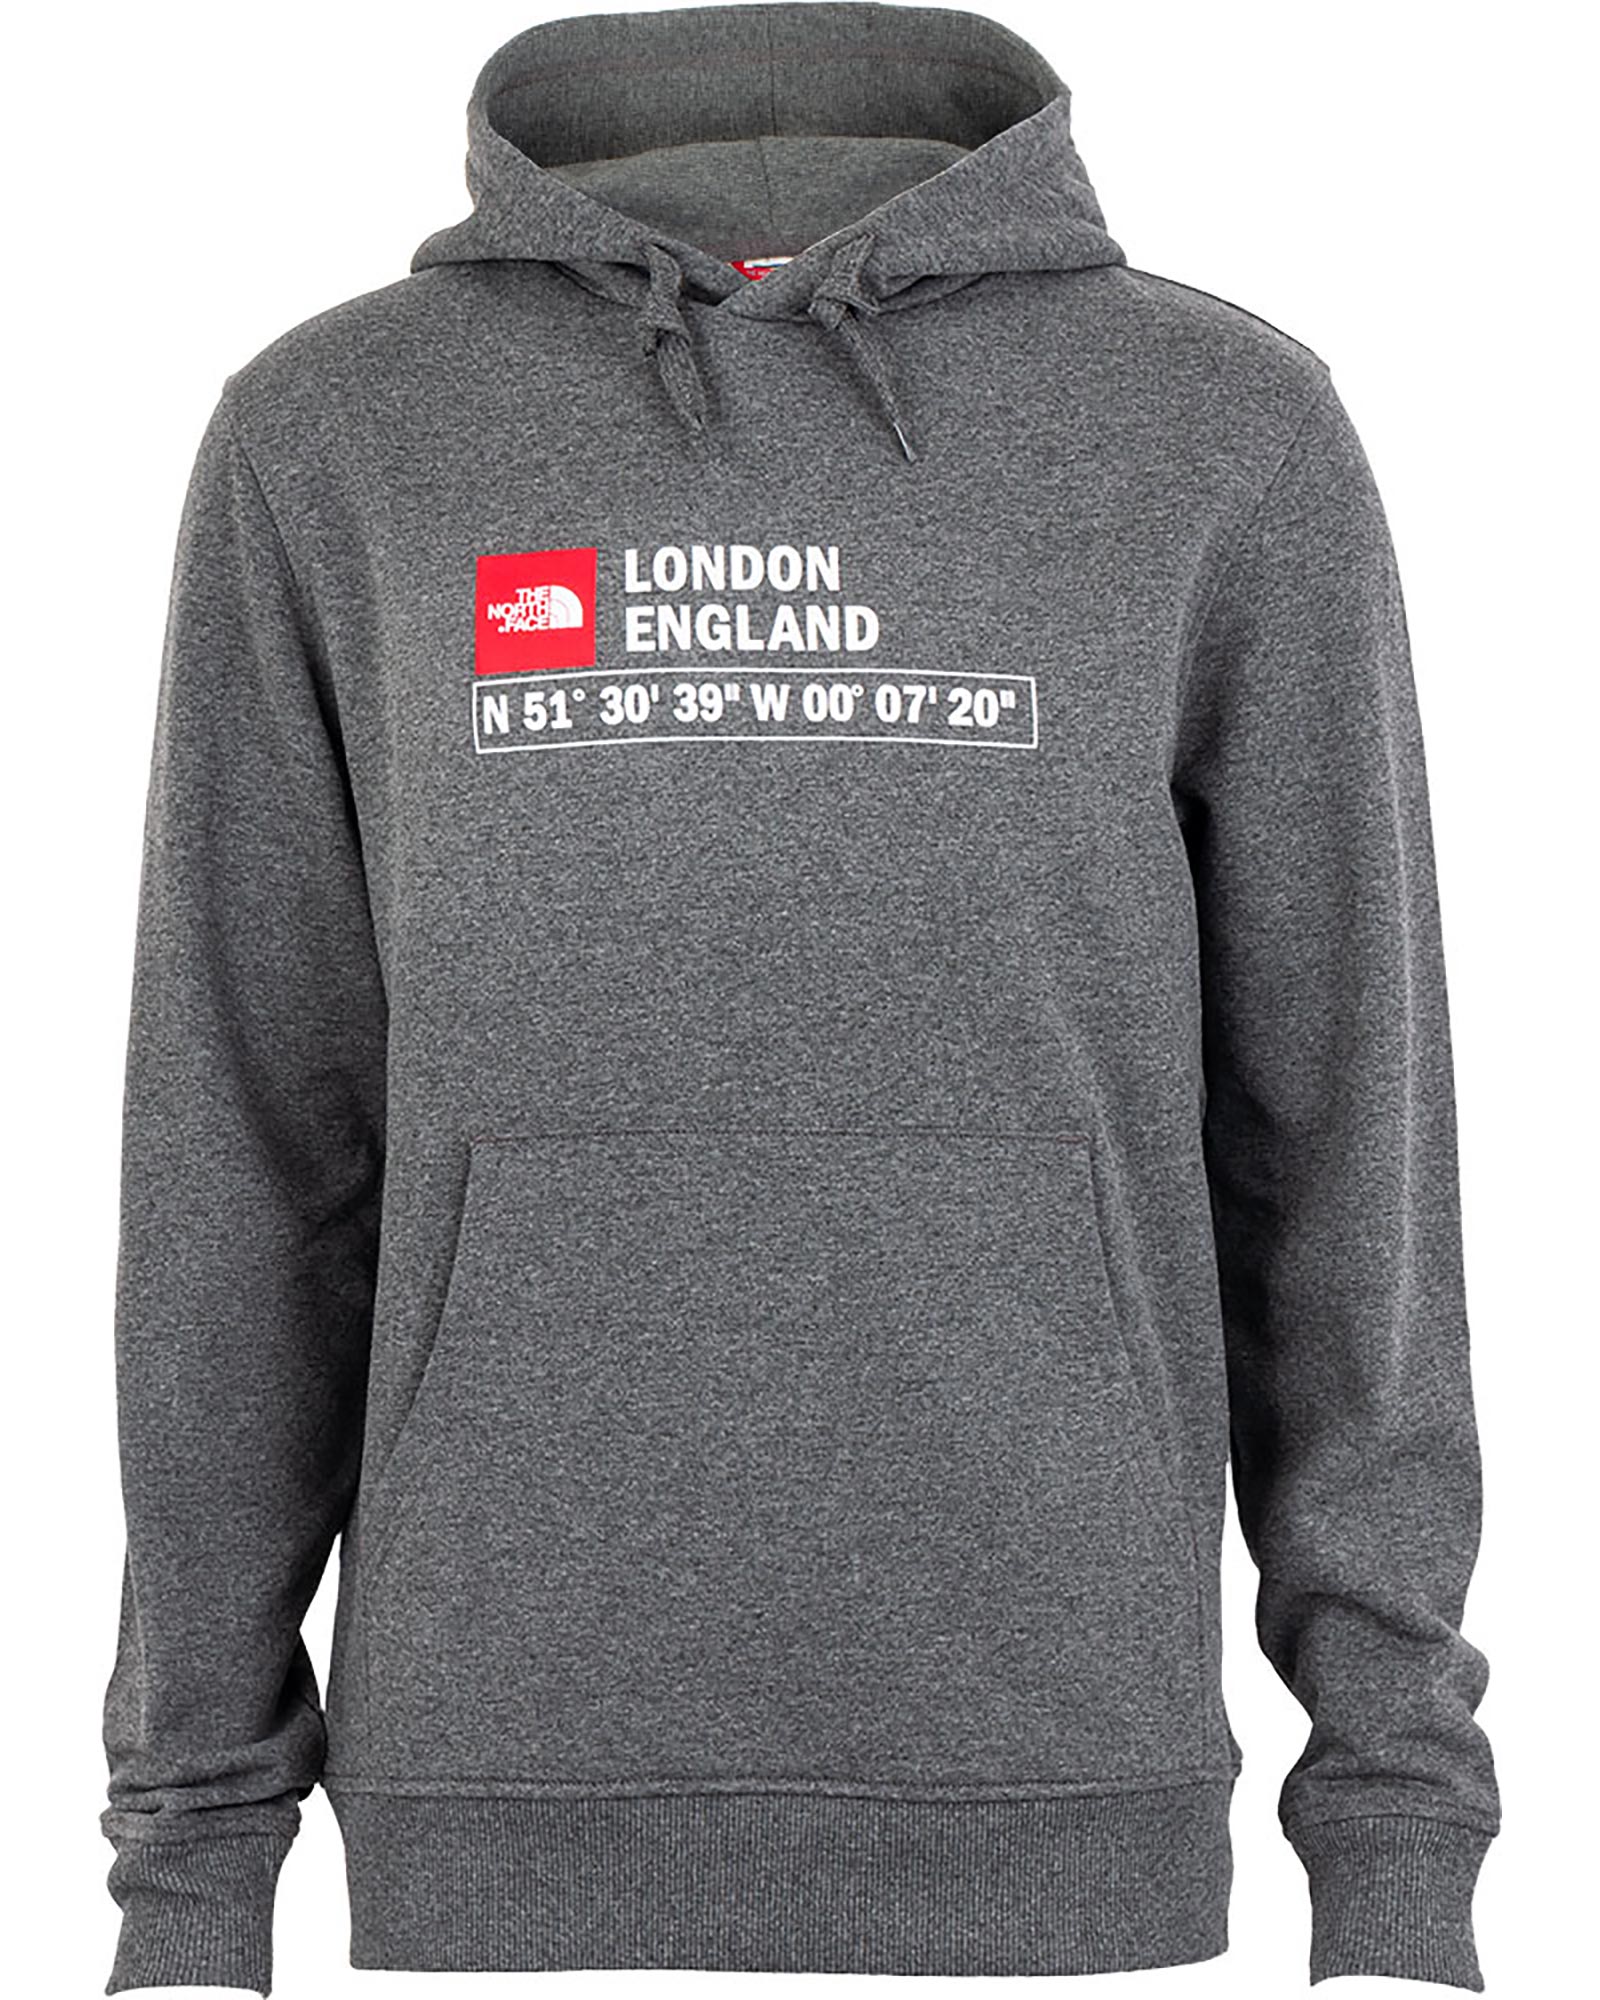 Product image of The North Face London GPS Men's Hoodie